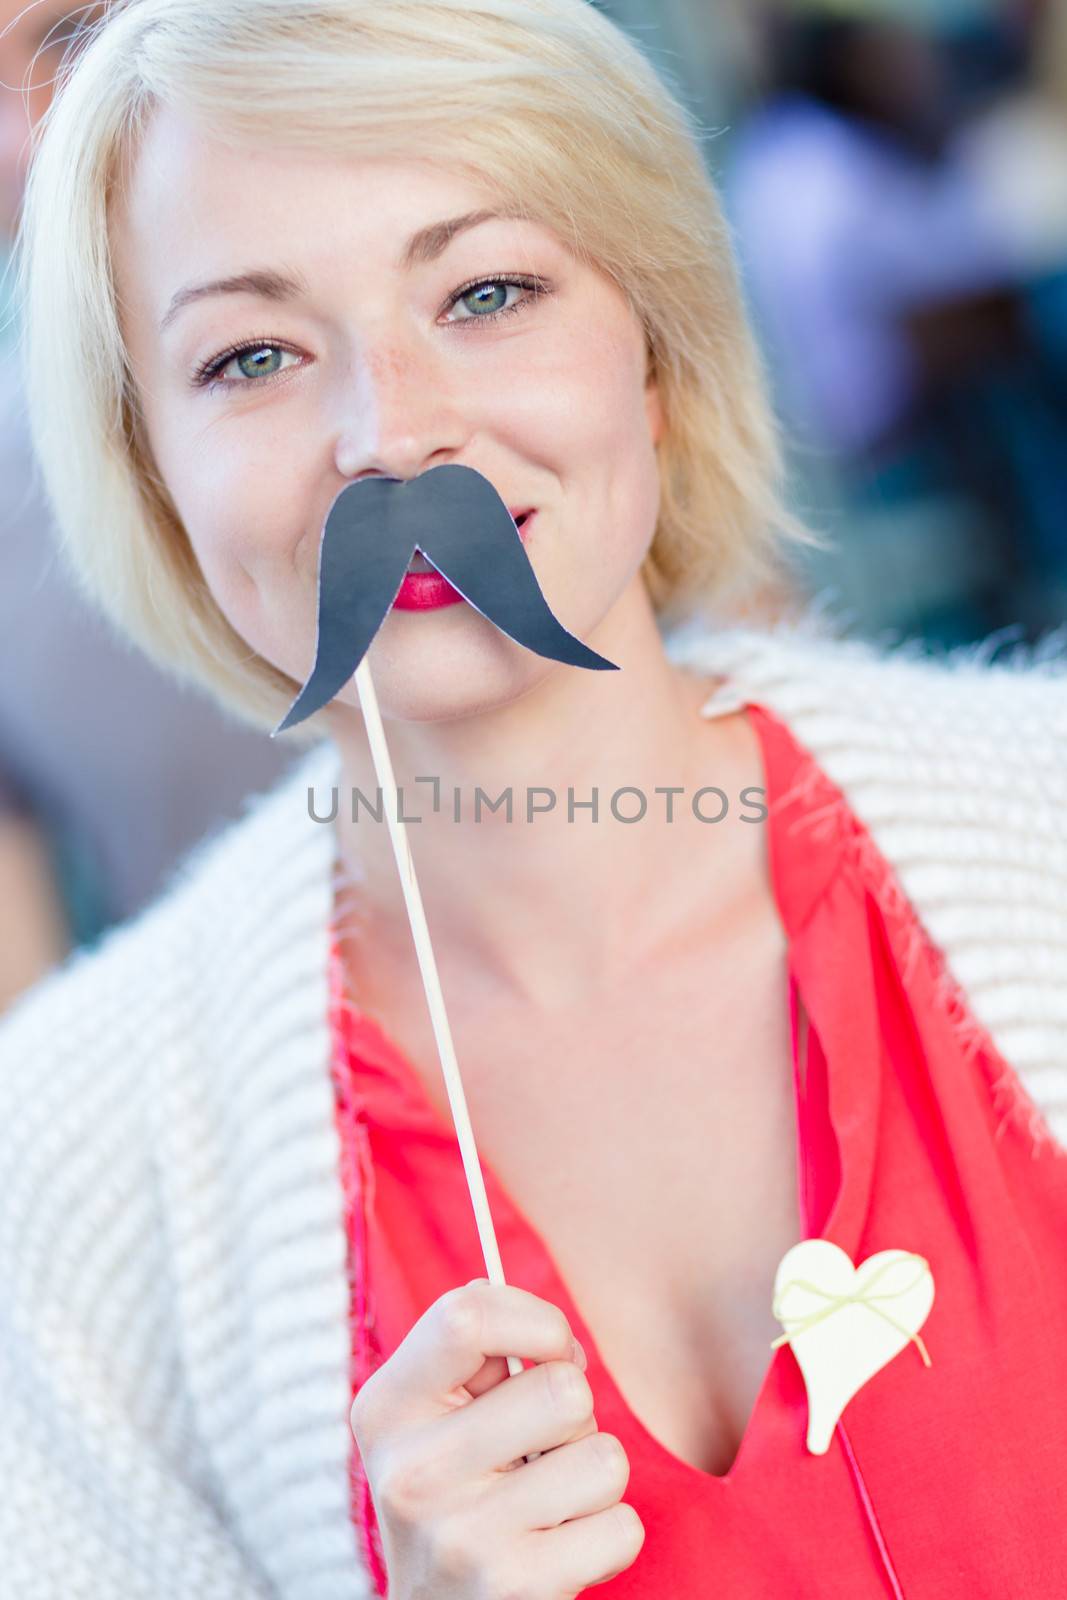 Portrait of girl wearing fake mustache: symbol of Movember, annual, month-long event involving the growing of moustaches during the month of November to raise awareness of men's health issues.